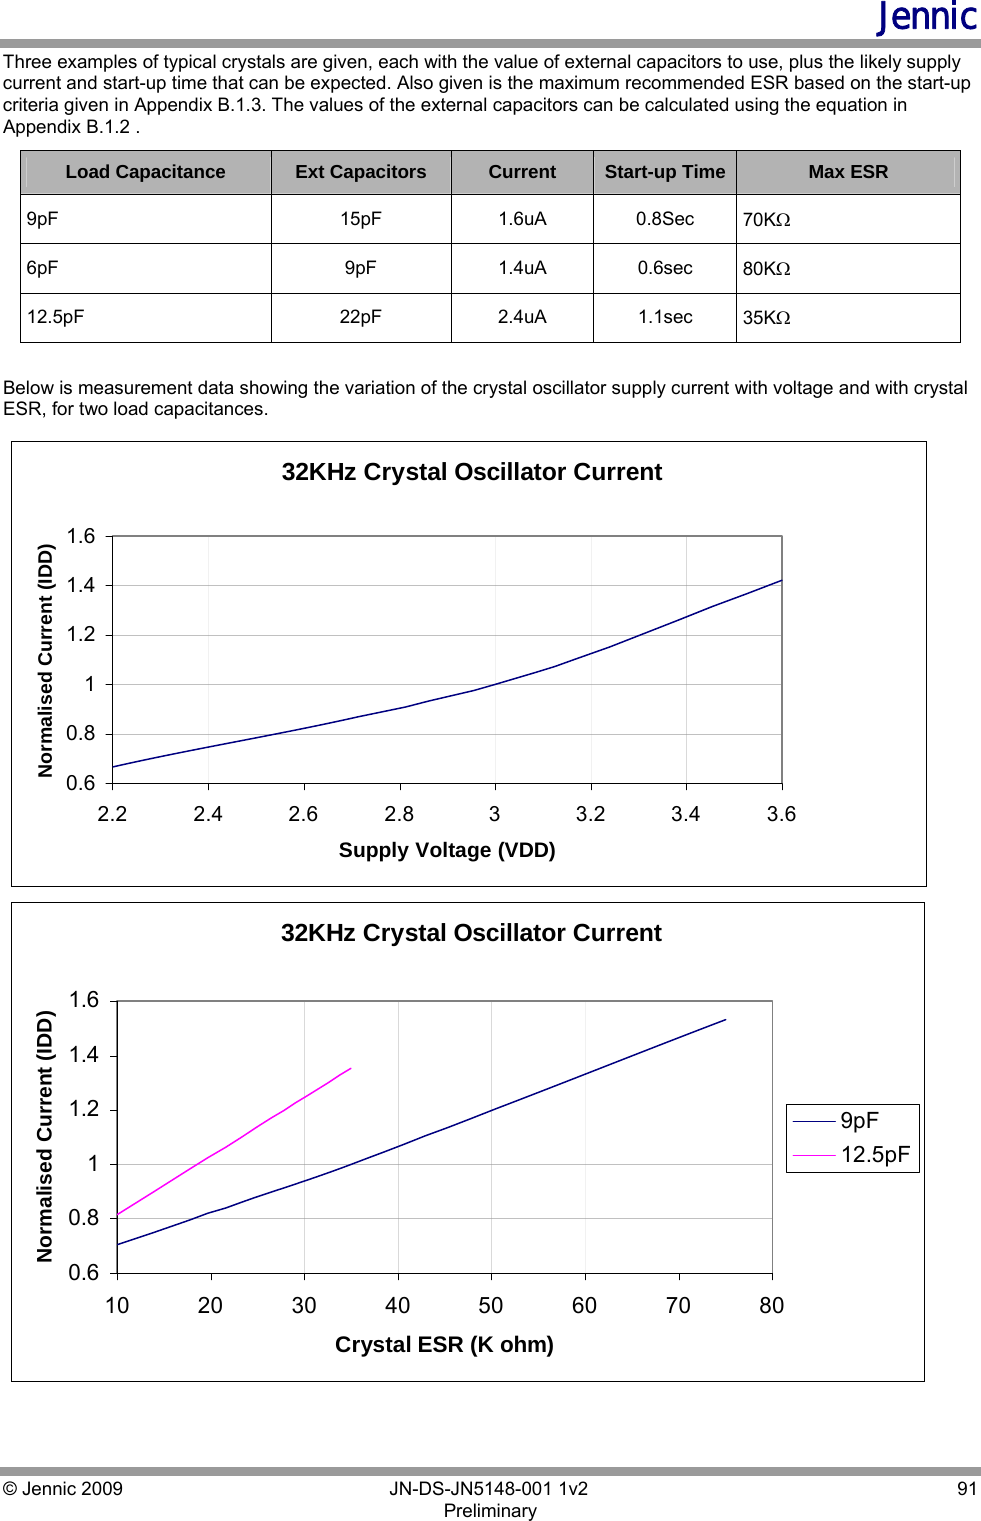 Jennic © Jennic 2009        JN-DS-JN5148-001 1v2  91 Preliminary  Three examples of typical crystals are given, each with the value of external capacitors to use, plus the likely supply current and start-up time that can be expected. Also given is the maximum recommended ESR based on the start-up criteria given in Appendix B.1.3. The values of the external capacitors can be calculated using the equation in Appendix B.1.2 . Load Capacitance  Ext Capacitors   Current  Start-up Time  Max ESR 9pF 15pF 1.6uA 0.8Sec 70KΩ 6pF 9pF 1.4uA 0.6sec 80KΩ 12.5pF 22pF 2.4uA 1.1sec 35KΩ  Below is measurement data showing the variation of the crystal oscillator supply current with voltage and with crystal ESR, for two load capacitances.  32KHz Crystal Oscillator Current0.60.811.21.41.62.2 2.4 2.6 2.8 3 3.2 3.4 3.6Supply Voltage (VDD)Normalised Current (IDD) 32KHz Crystal Oscillator Current0.60.811.21.41.610 20 30 40 50 60 70 80Crystal ESR (K ohm)Normalised Current (IDD)9pF12.5pF 